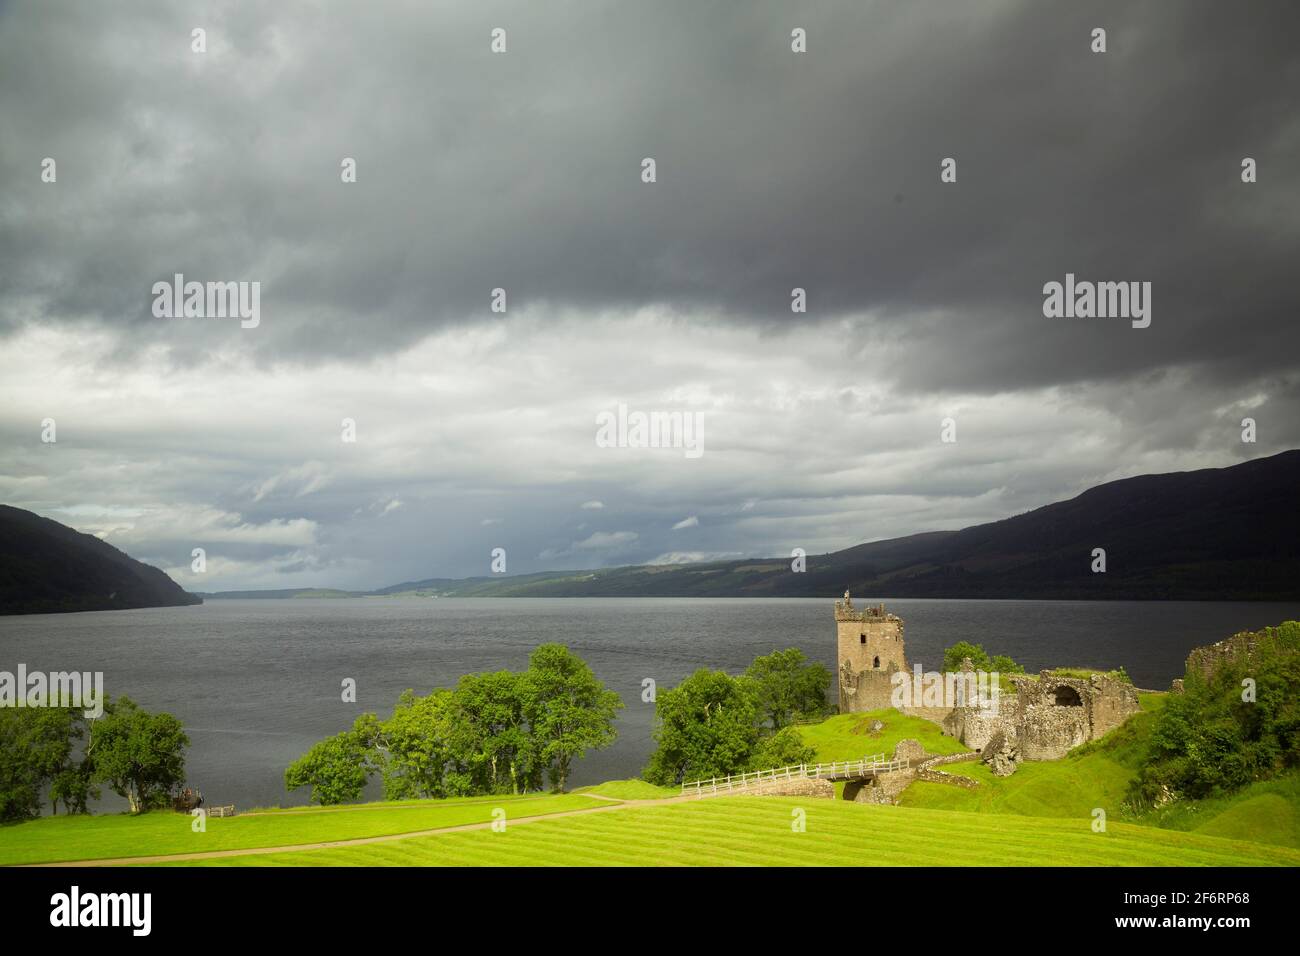 View of Urquhart Castle in sunlight with Loch Ness under dark clouds behind. Stock Photo